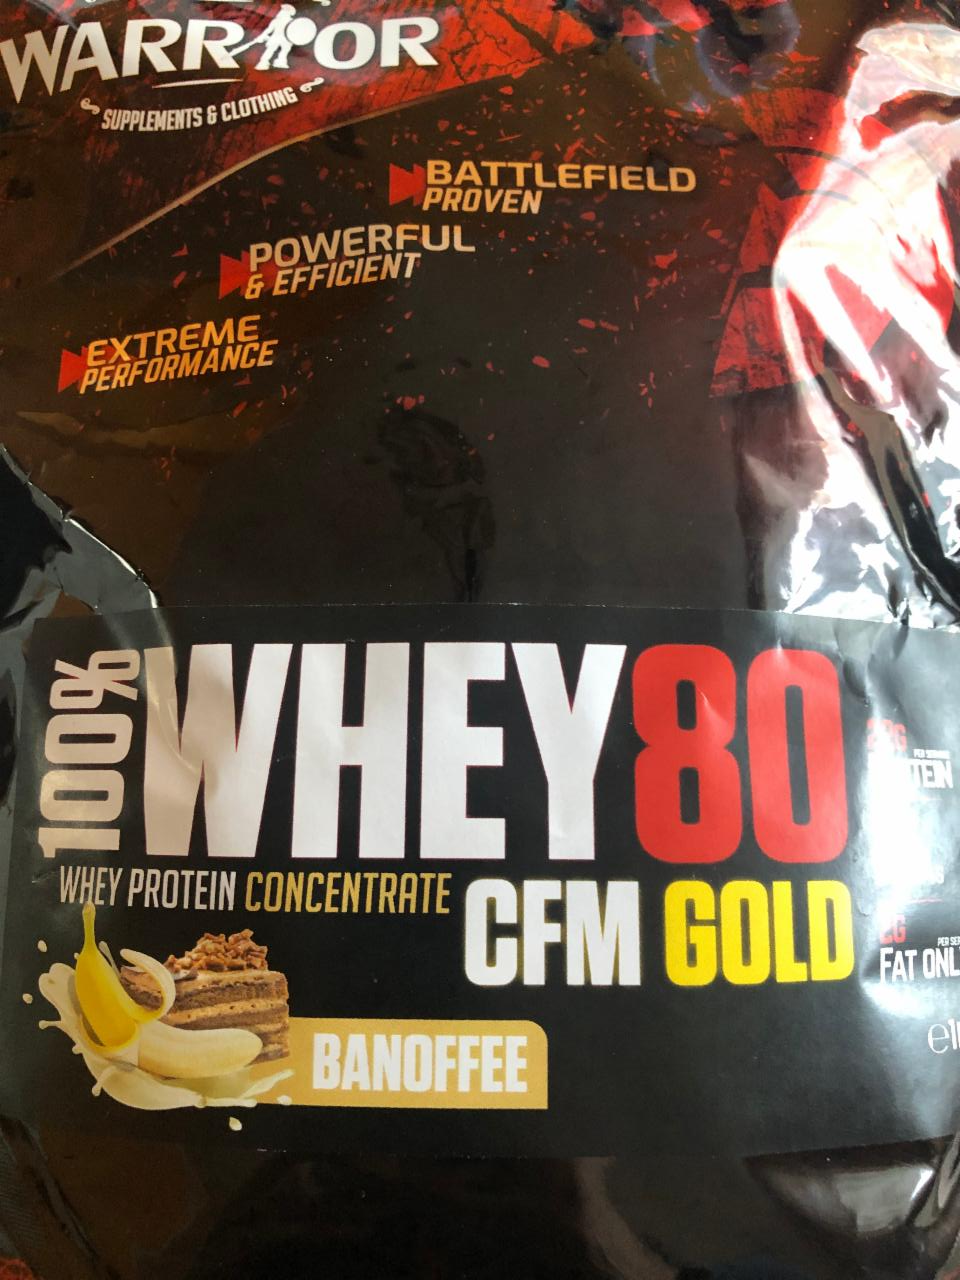 Fotografie - WHEY 80 CFM GOLD BANOFFEE Natural Nutrition